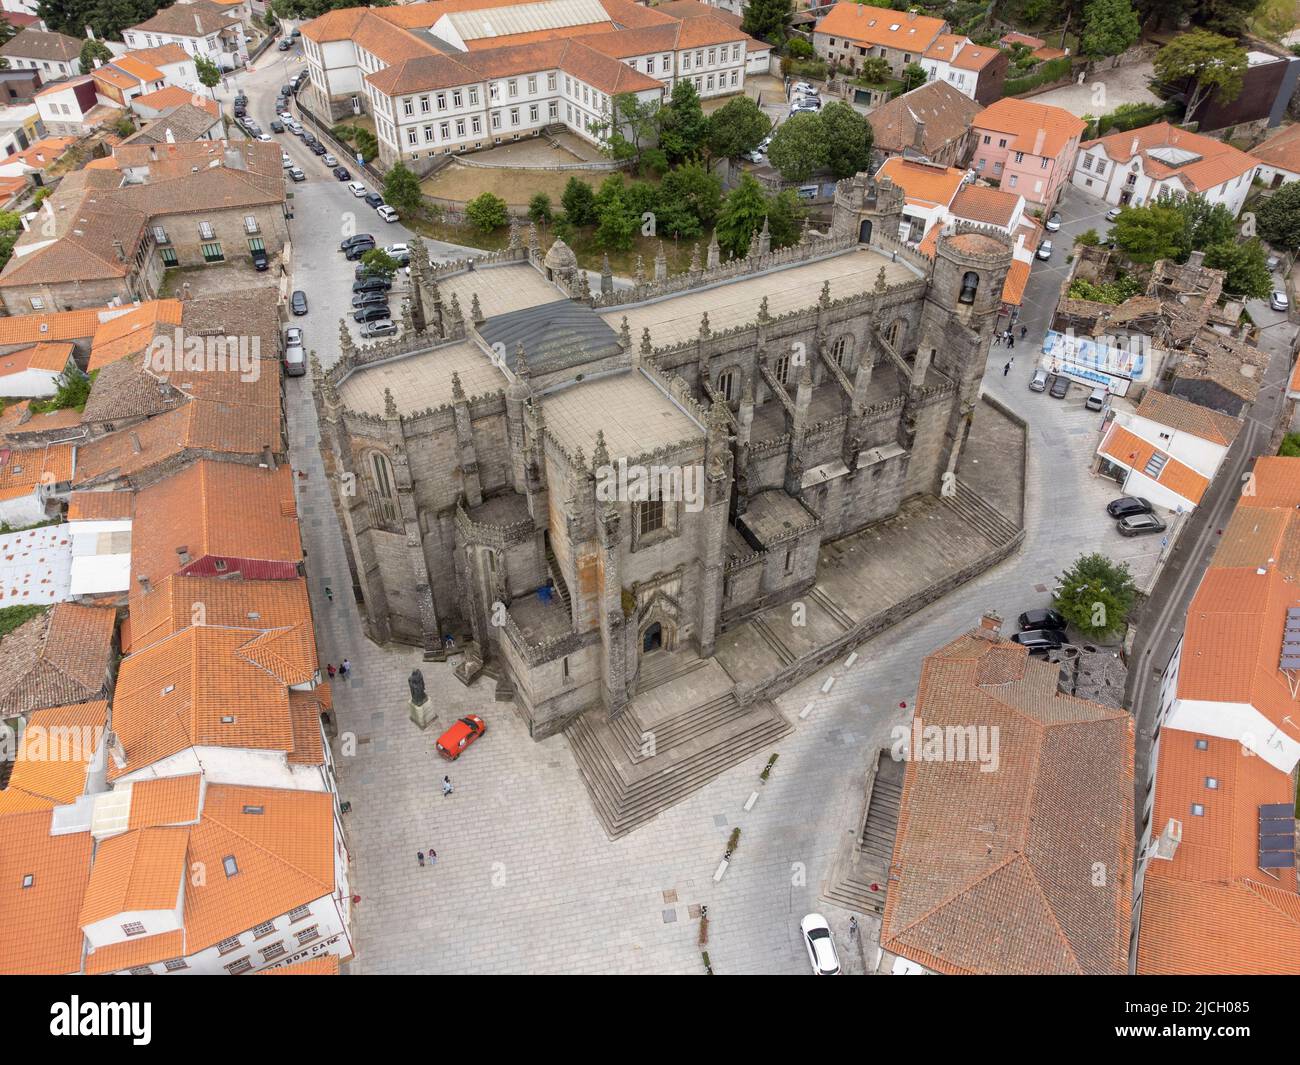 Aerial view of the Cathedral of Guarda - Sé Catedral da Guarda, Portugal, Europe Stock Photo